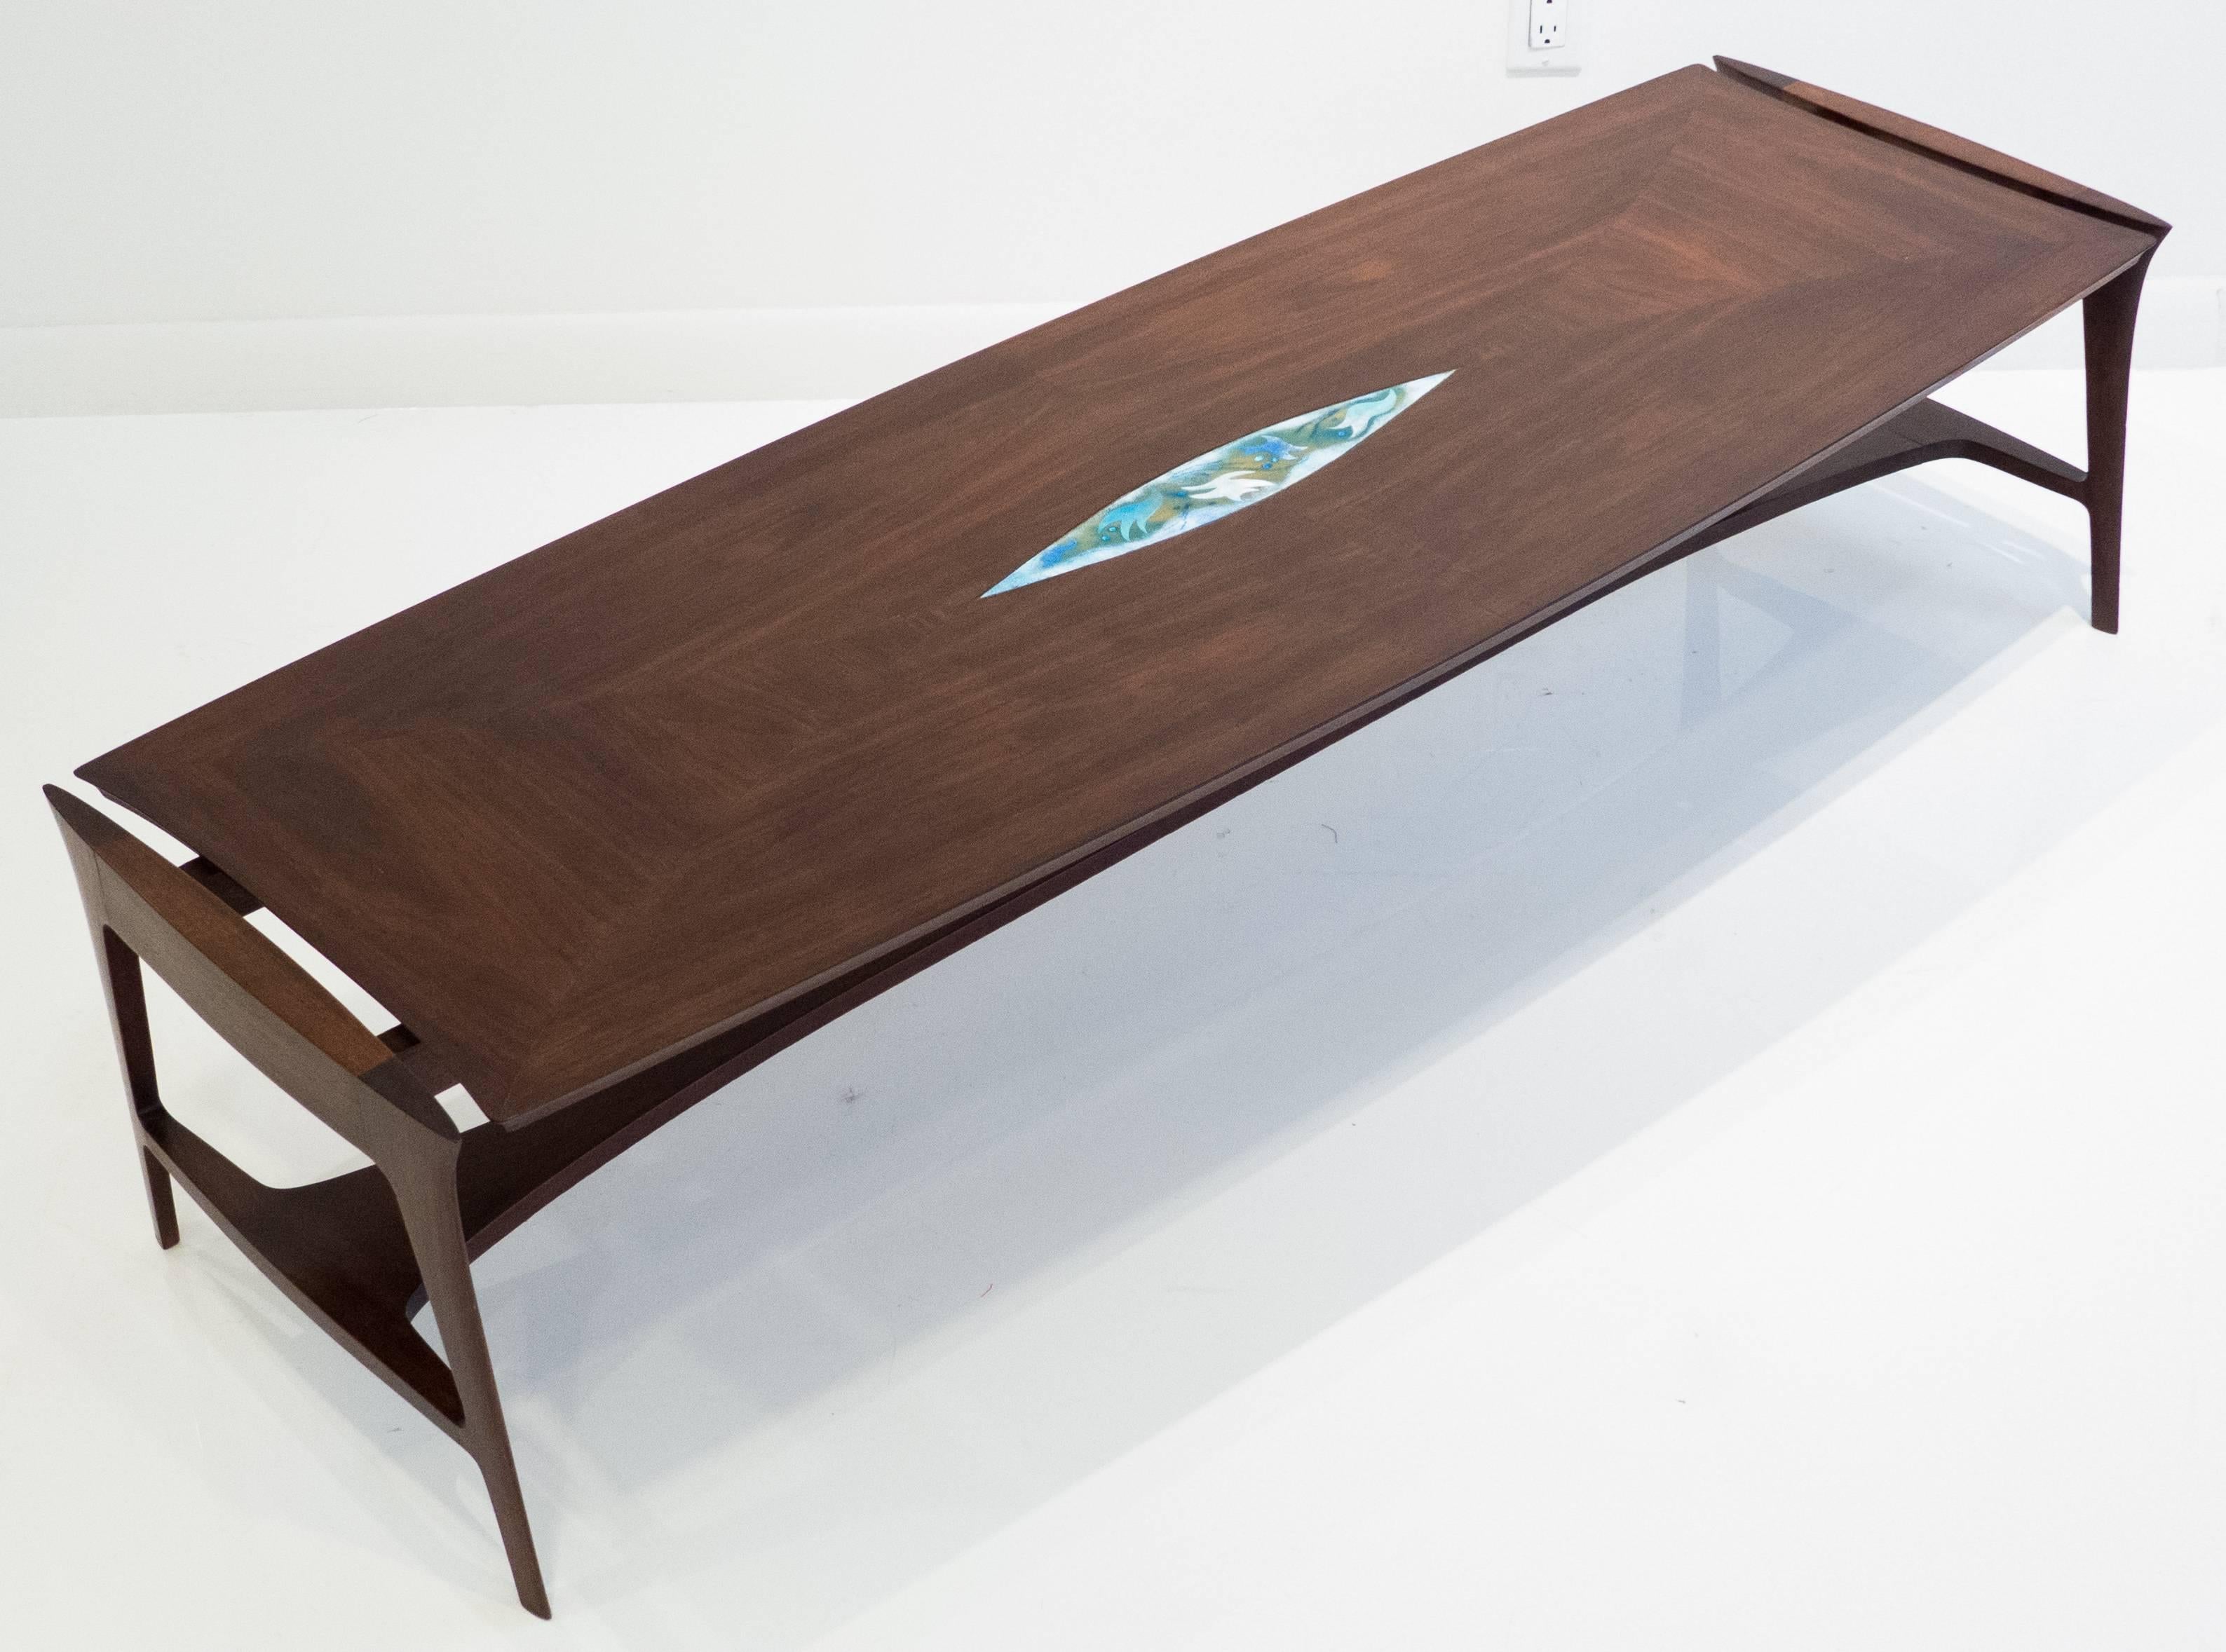 Elongated and stylish cocktail table of walnut with an enamel insert in the centre. The tapering bottom stretcher and side rails are nicely joined and have a European/Jugenstil flair to them, as well as an architectural presence evoking perhaps a